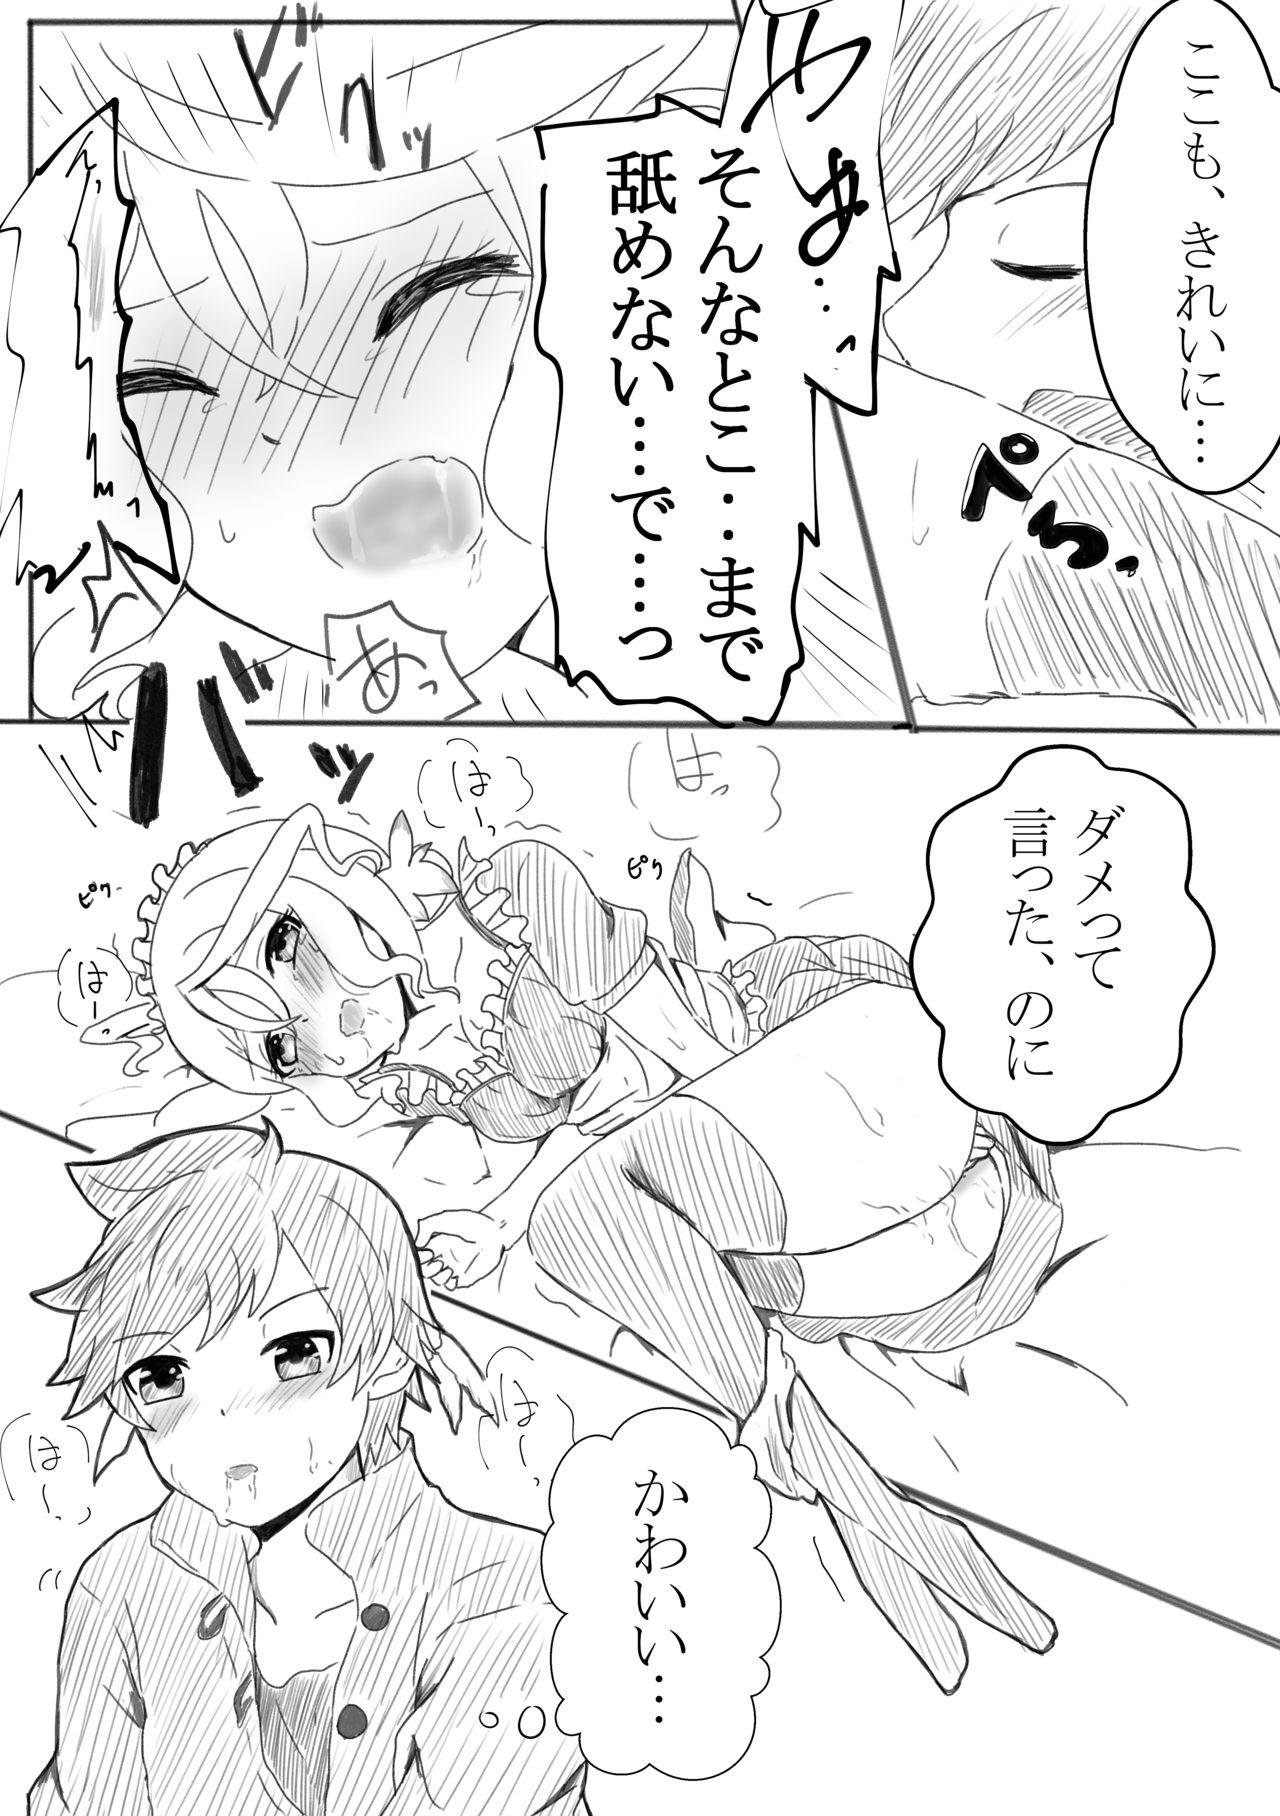 Hairy アリーシャで癒して？ - Tales of zestiria Village - Page 9